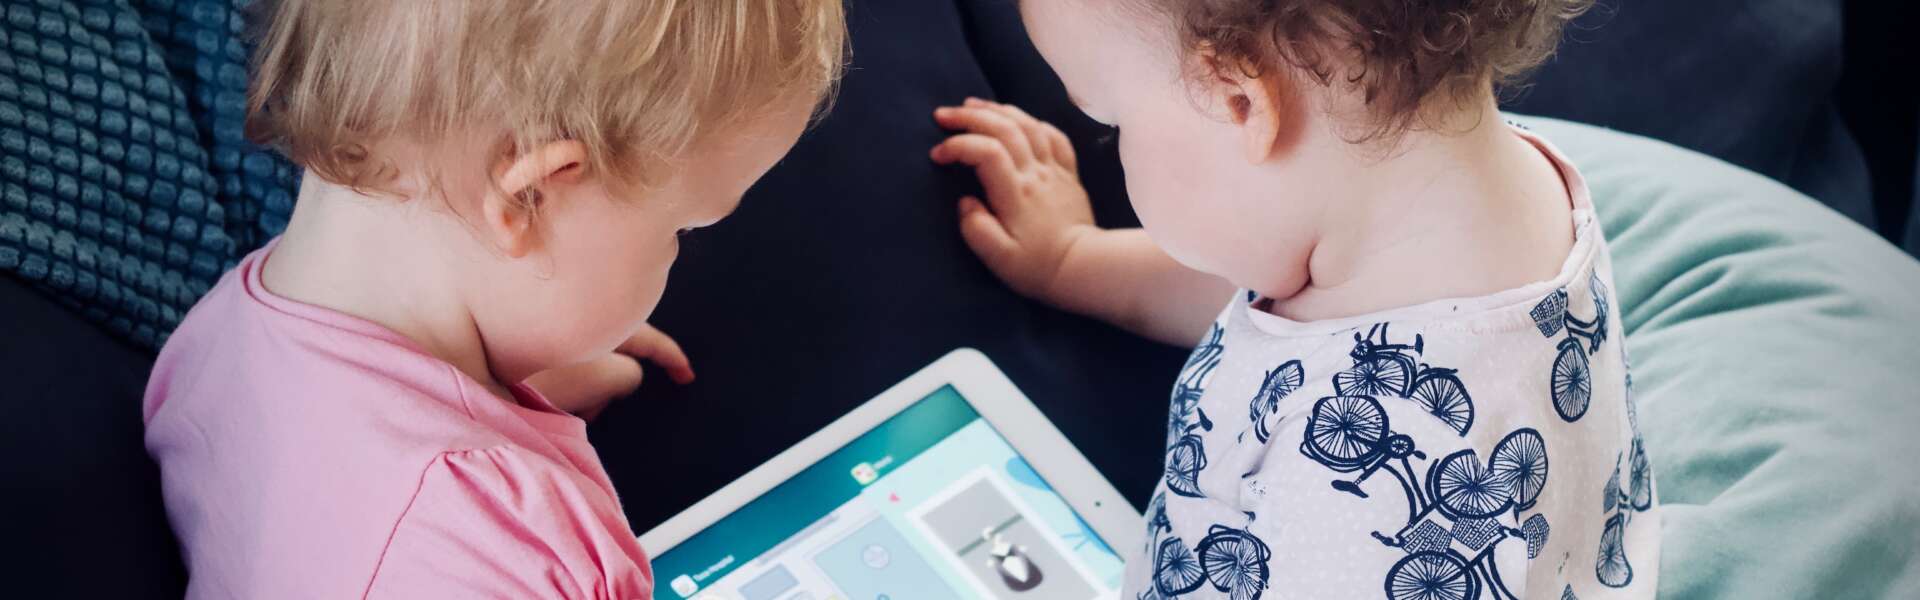 Toddlers use a tablet/